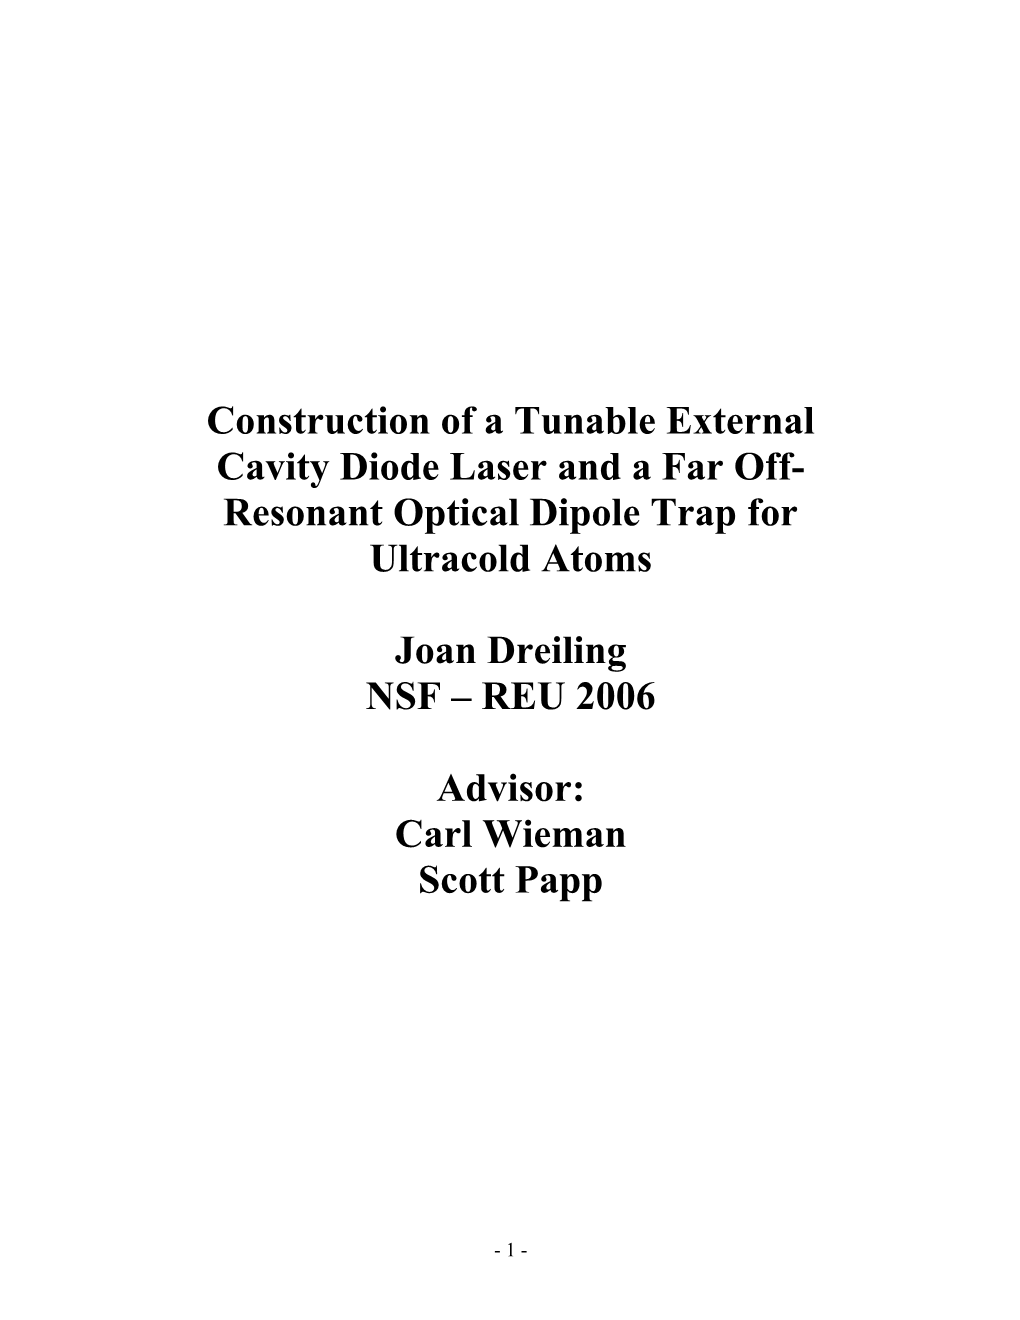 Construction of a Variable Frequency Diode Laser and an Optical Trap